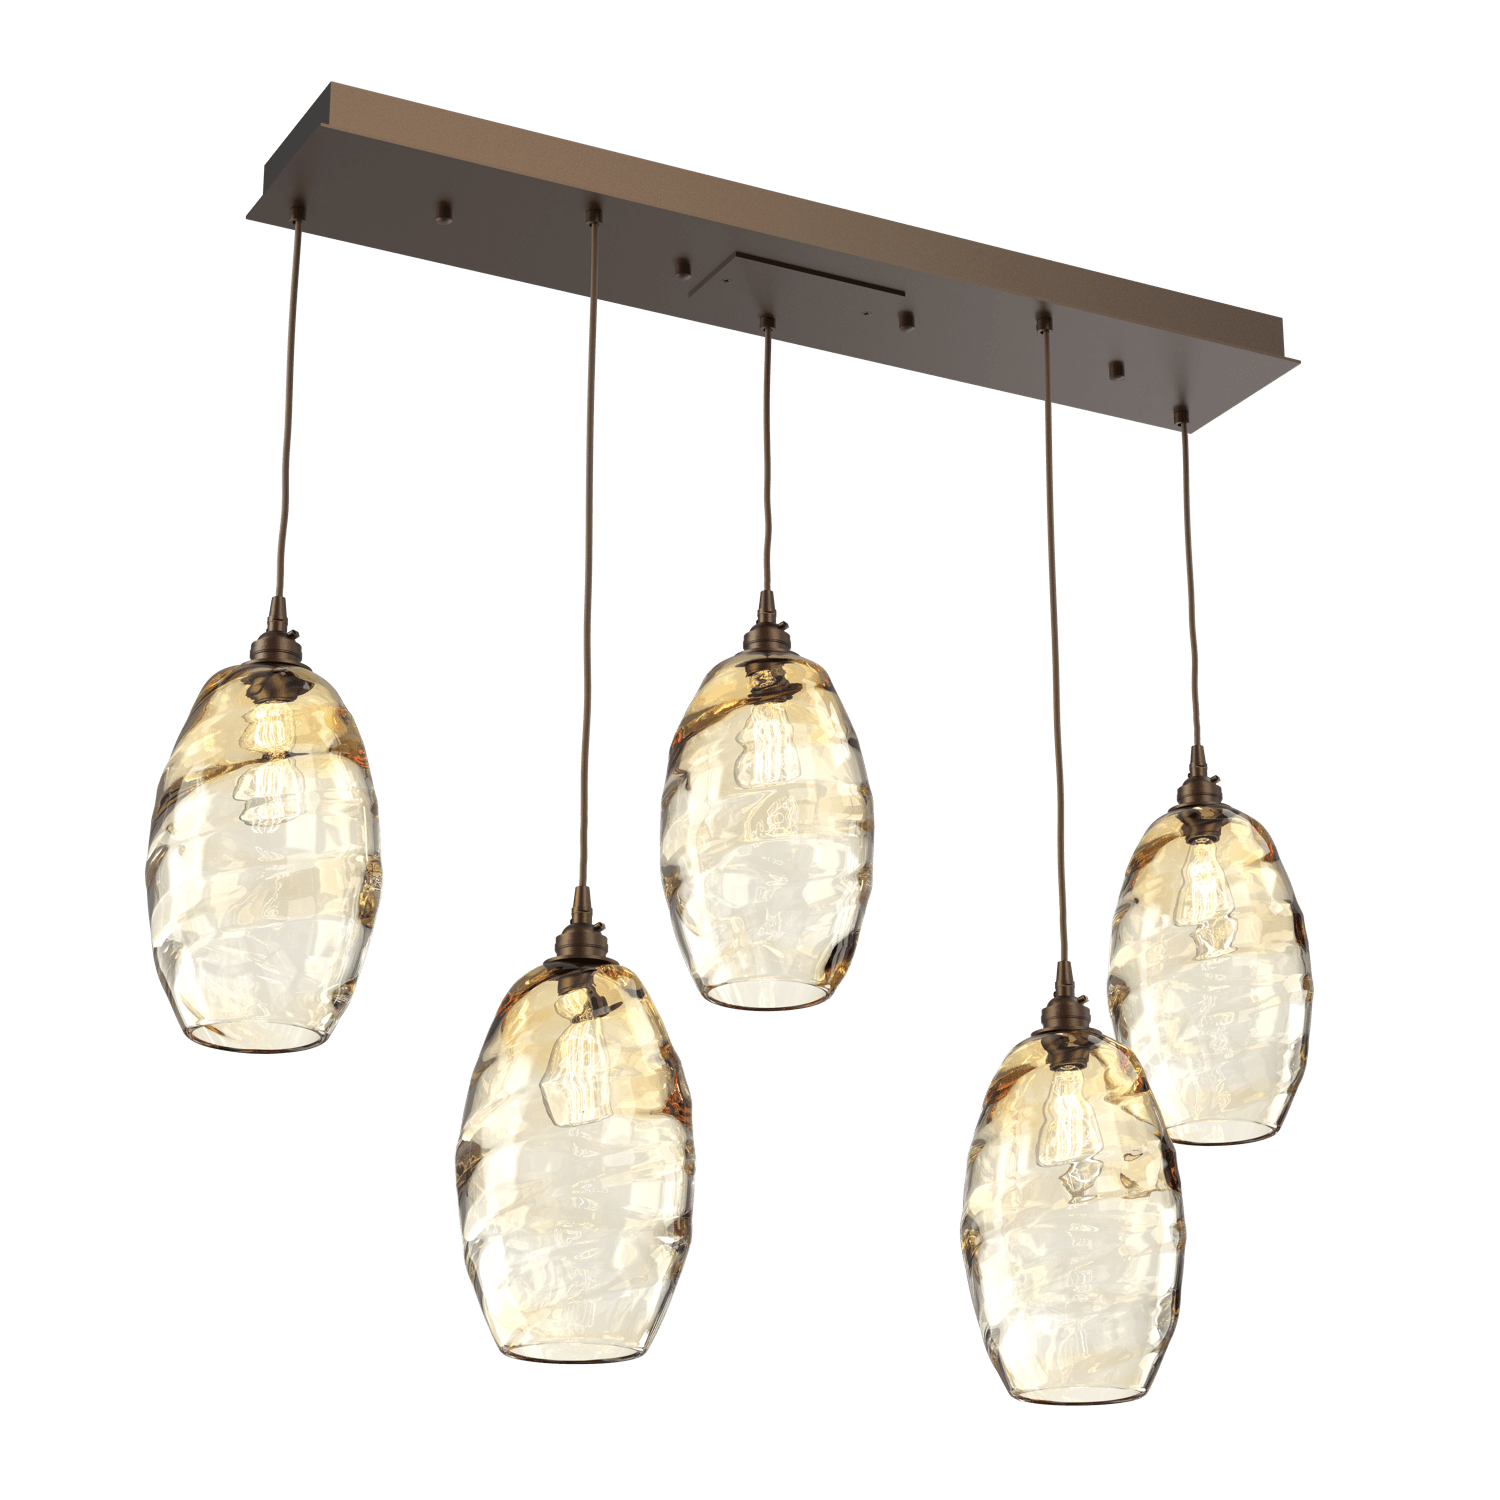 PLB0035-05-FB-OA-Hammerton-Studio-Optic-Blown-Glass-Elisse-5-light-linear-pendant-chandelier-with-flat-bronze-finish-and-optic-amber-blown-glass-shades-and-incandescent-lamping